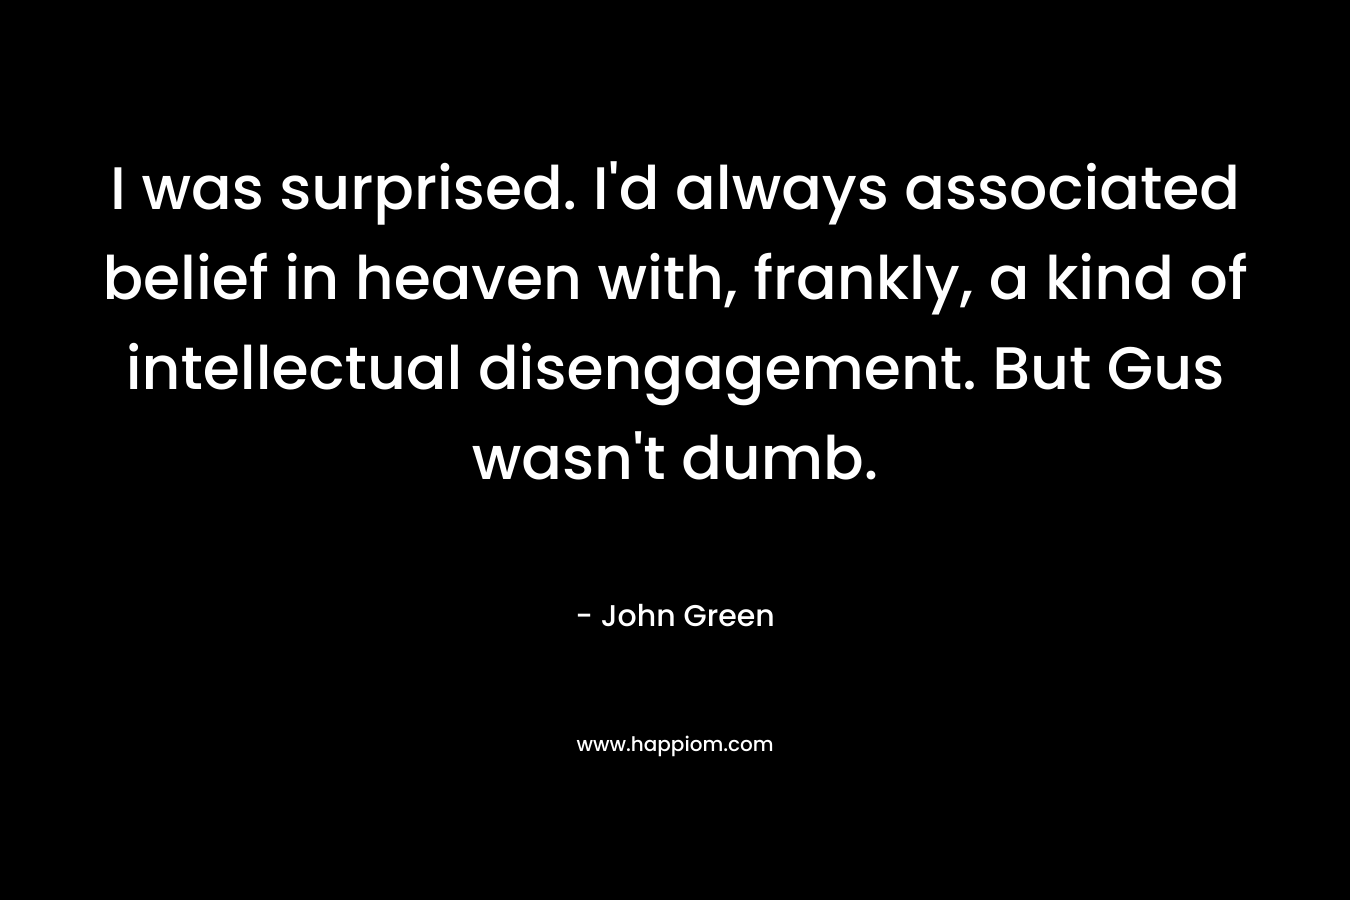 I was surprised. I'd always associated belief in heaven with, frankly, a kind of intellectual disengagement. But Gus wasn't dumb.